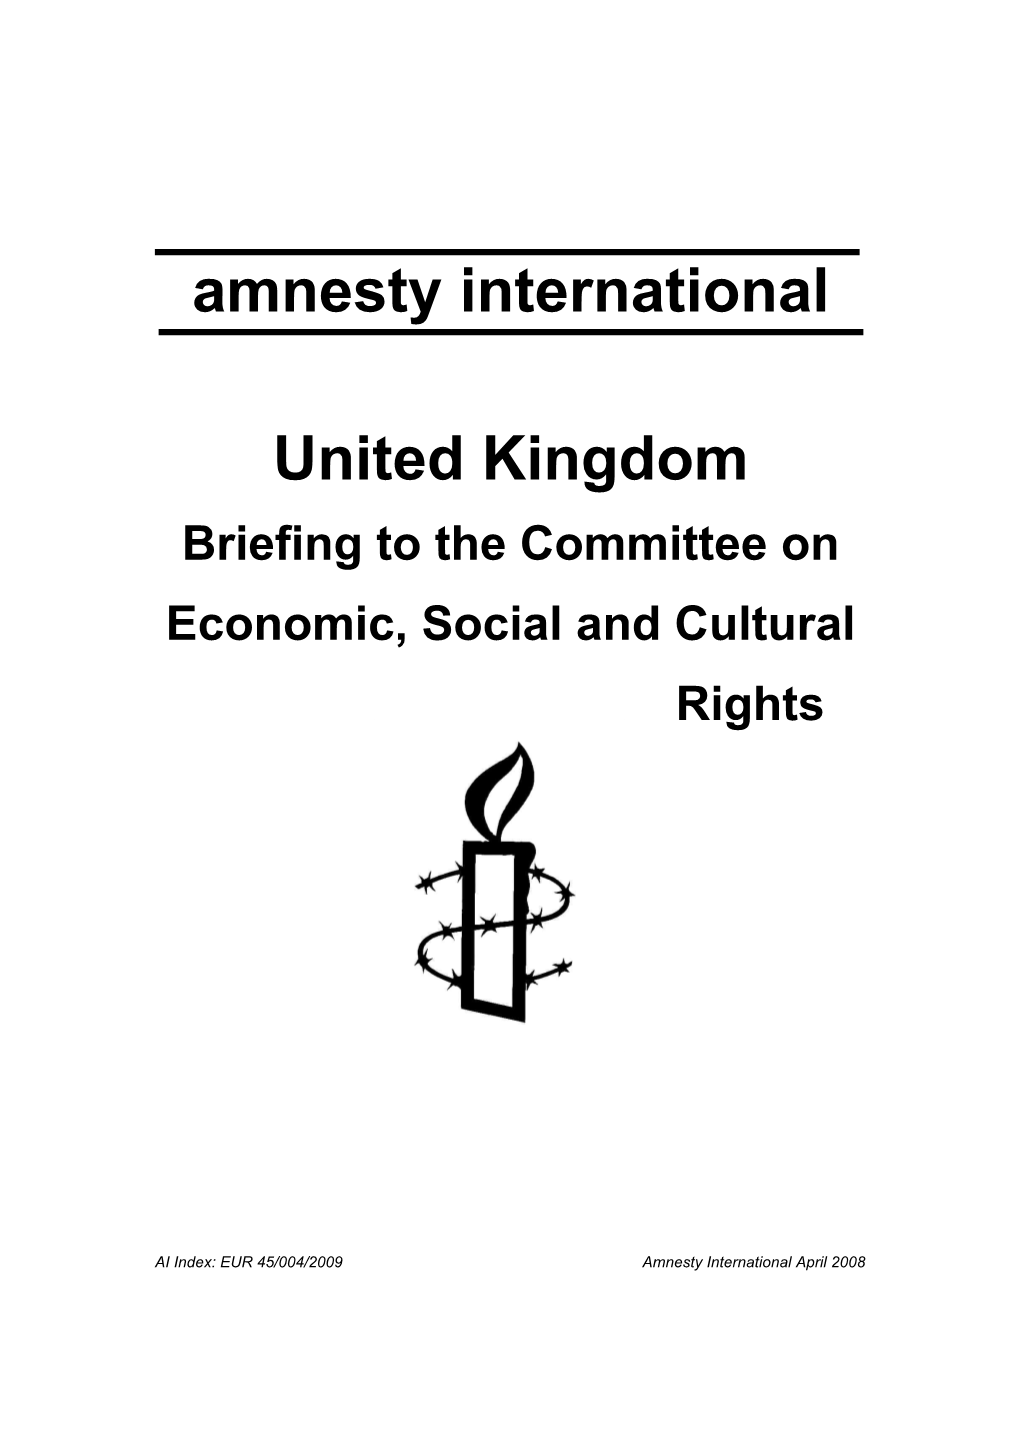 Briefing to the Committee on Economic, Social and Cultural Rights